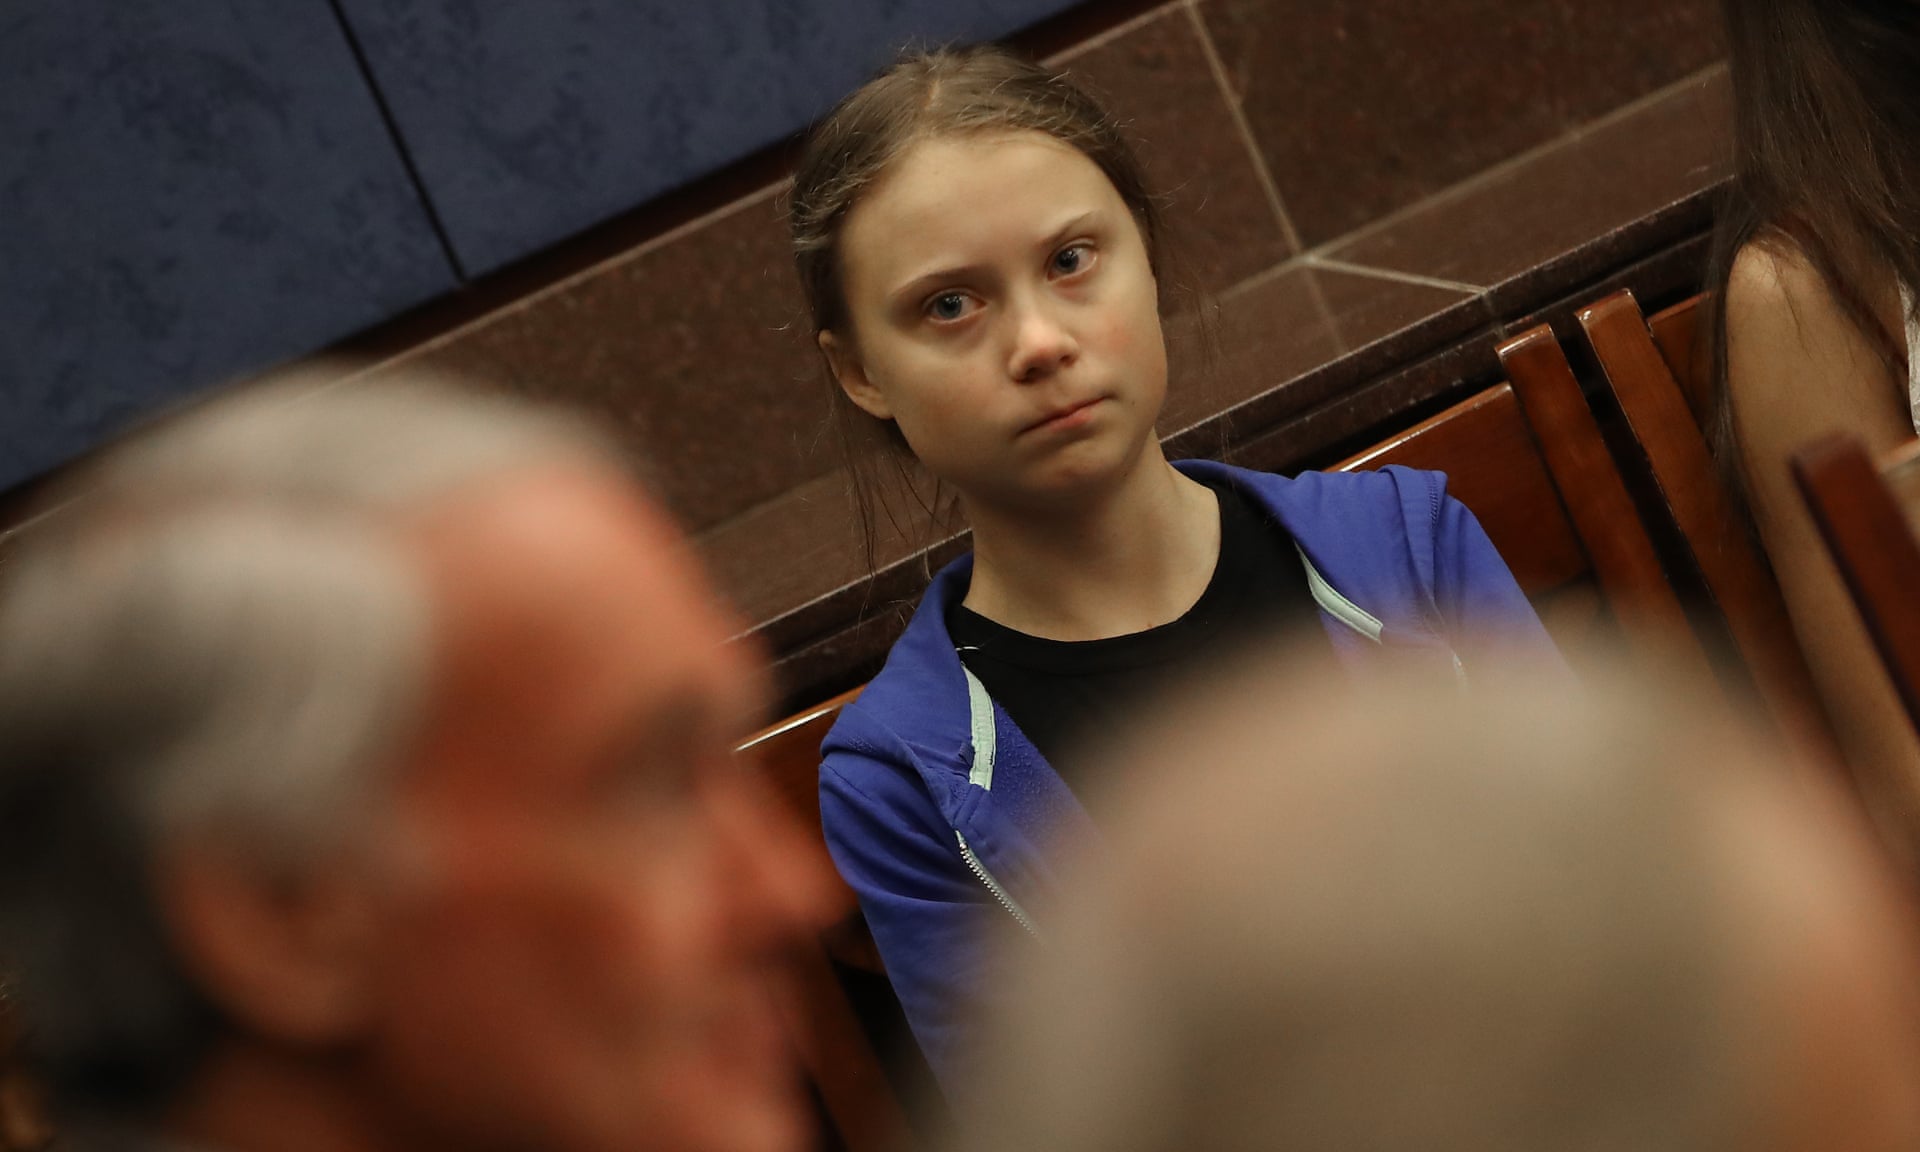 Greta Thunberg attends a Senate climate change task force meeting in Washington DC, 17 September 2019. Photo: Mark Wilson / Getty Images